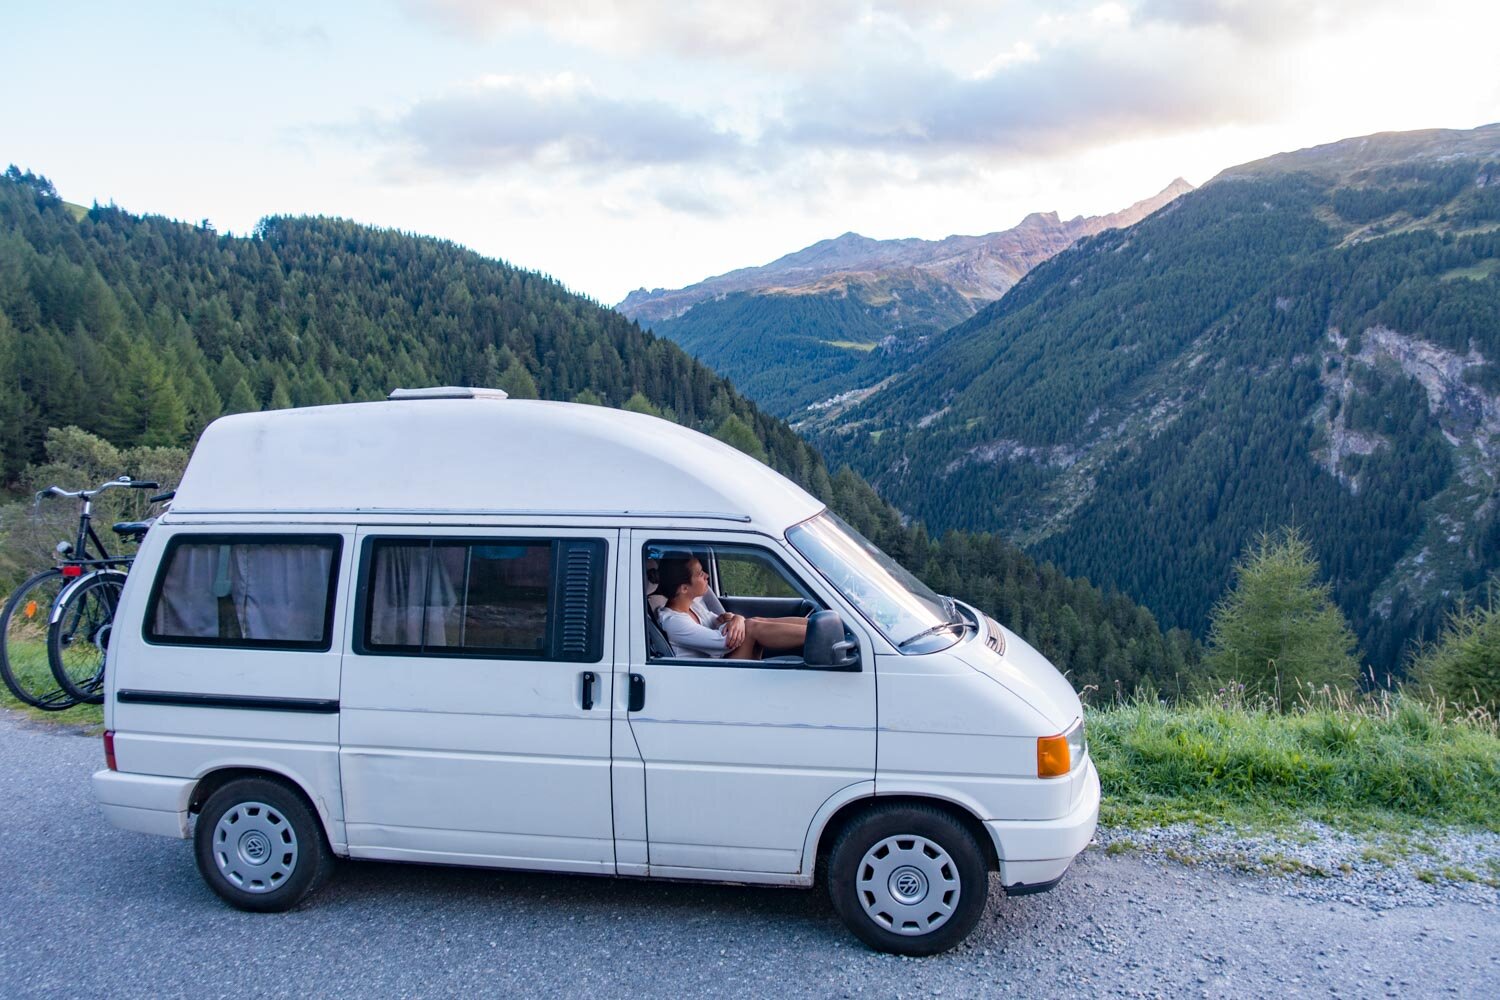 The Cost of Vanlife: How Much Does it Cost to Travel Europe by Van for 6 Months?